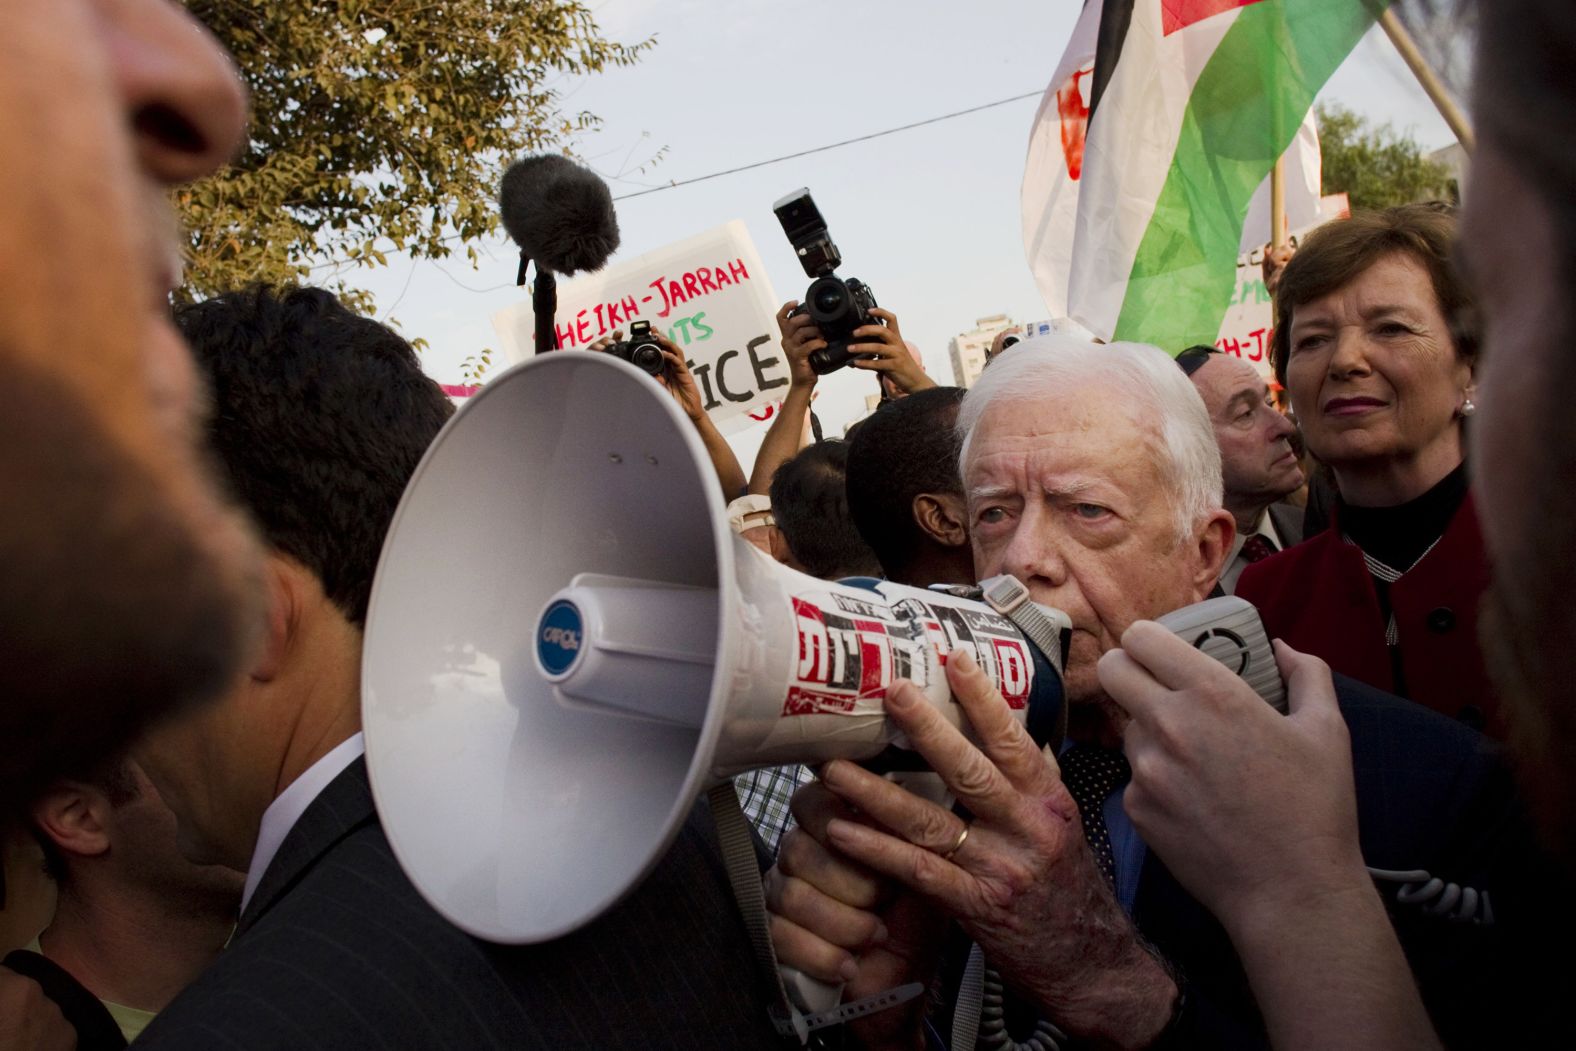 Carter visits a weekly anti-settlement protest in the east Jerusalem neighborhood of Sheikh Jarrah in October 2010. Former Irish President Mary Robinson is on the right.